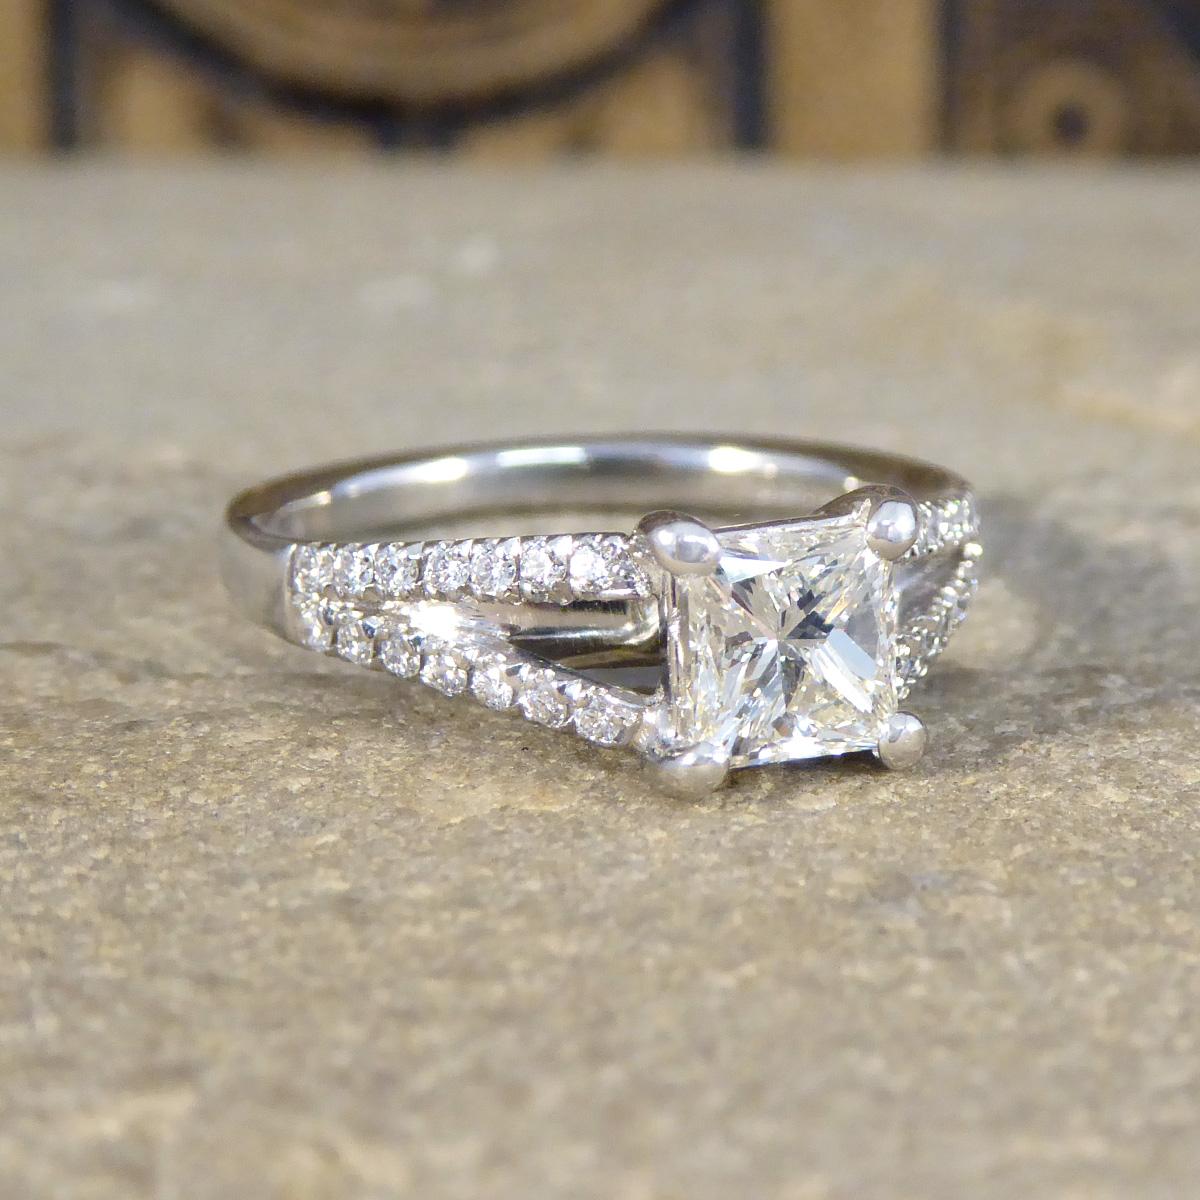 Introducing our exquisite 0.77ct Princess Cut Diamond ring, a masterpiece of design and craftsmanship set in luxurious Platinum. At the heart of this stunning ring sits a princess cut diamond weighing approximately 0.77ct, renowned for its sharp